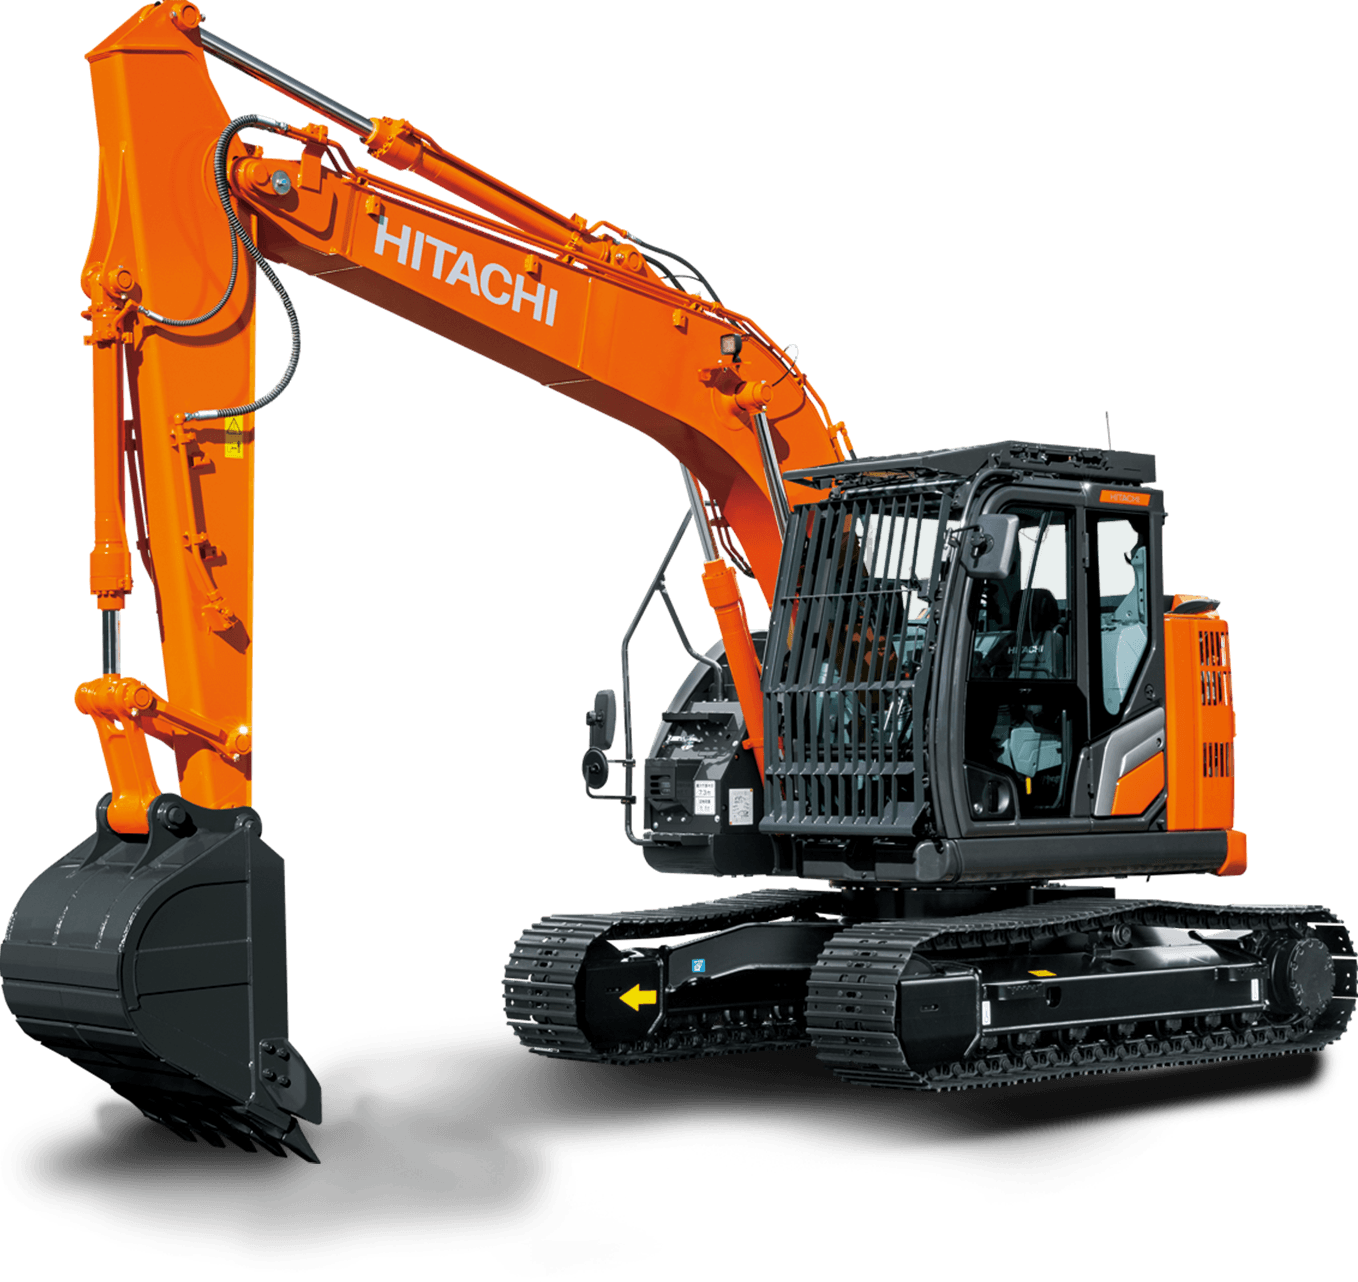 ZAXIS120 / ZAXIS135US / ZAXIS135USOS｜ZAXIS 7 SERIES 新型 